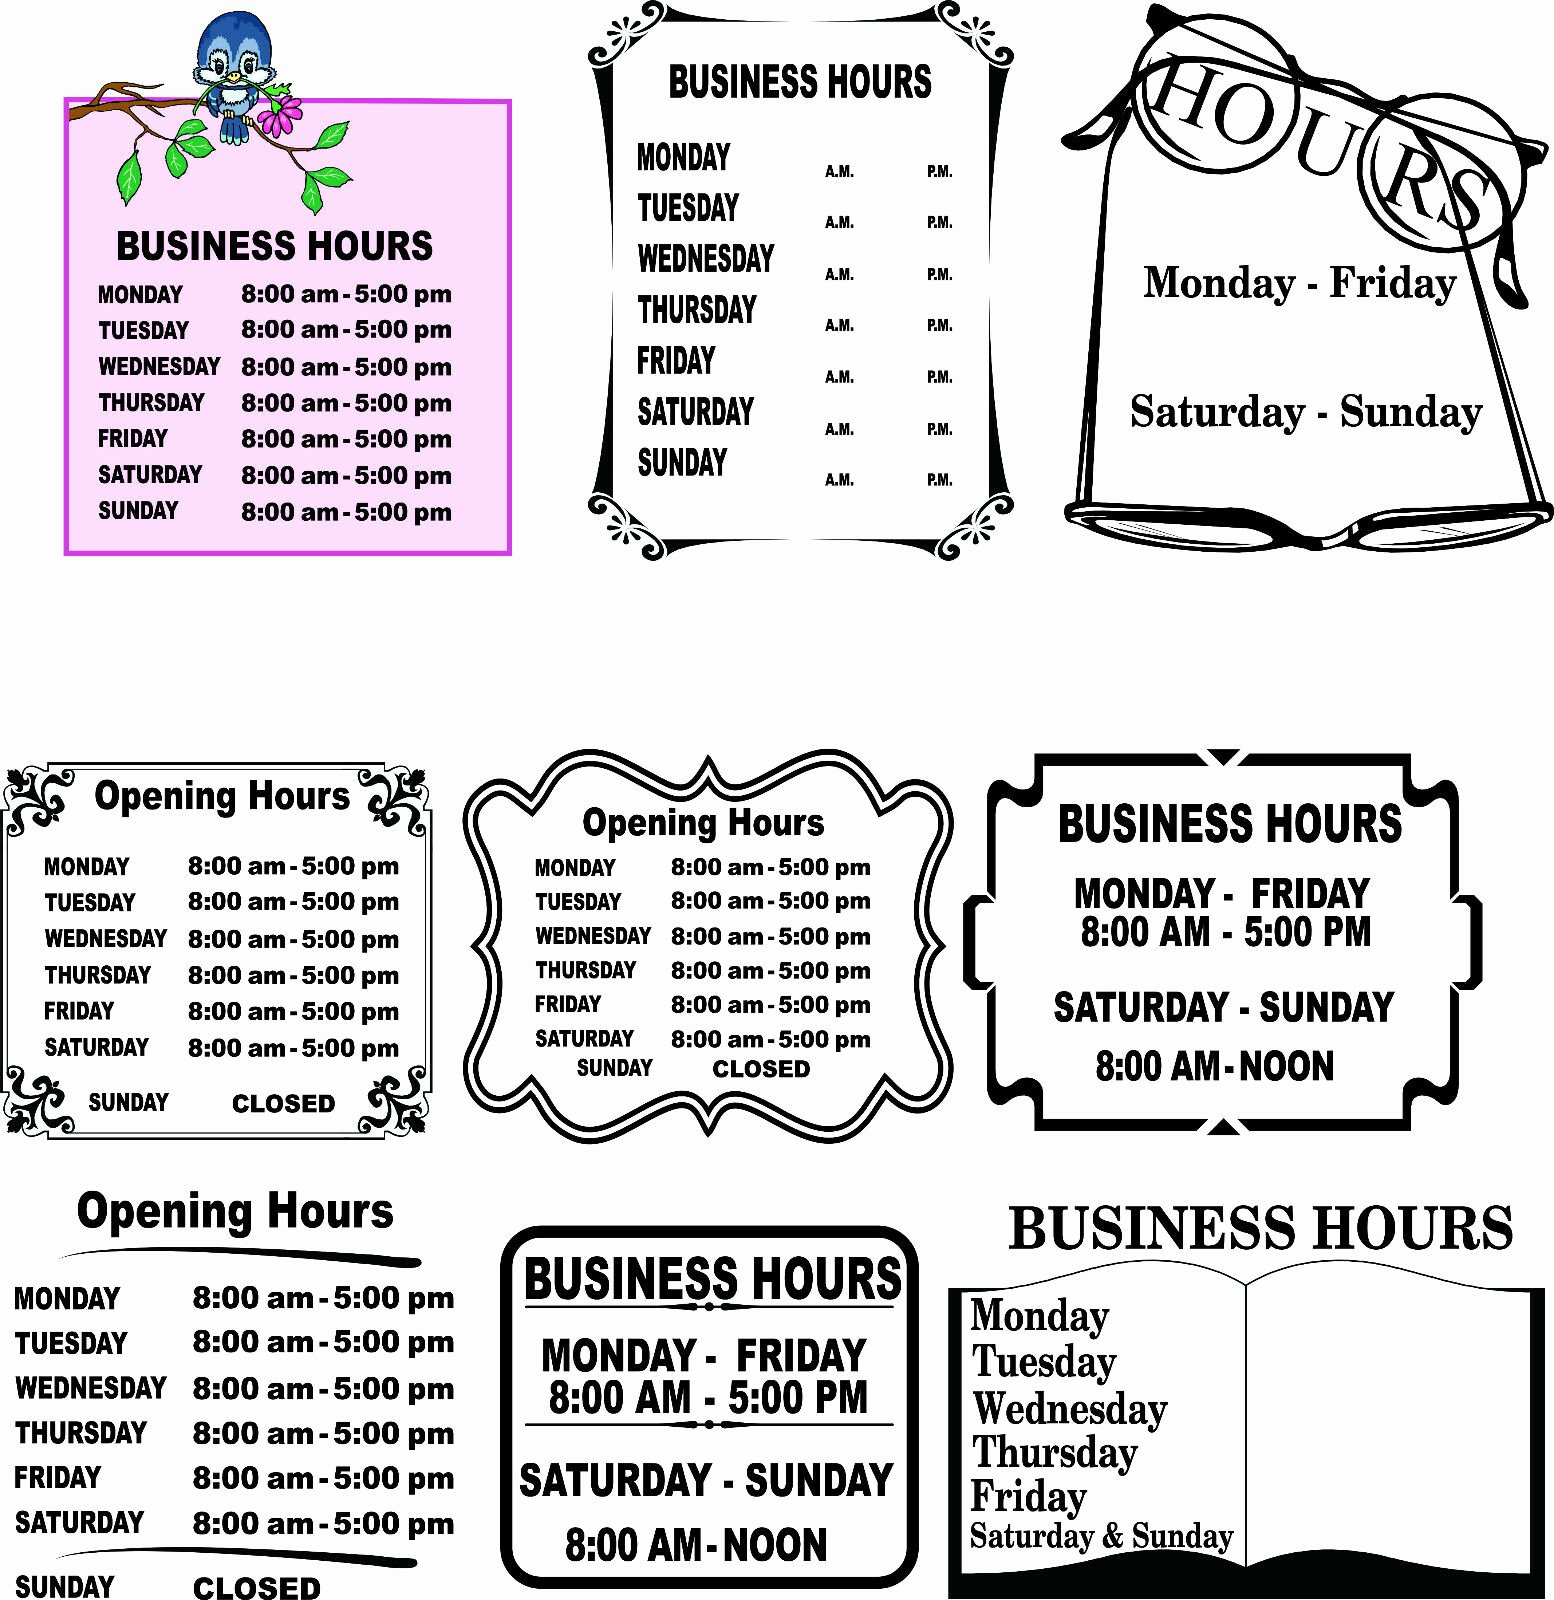 Business Hours Sign Template New 52 Business Hours Sign Templates Vector Clipart for Vinyl